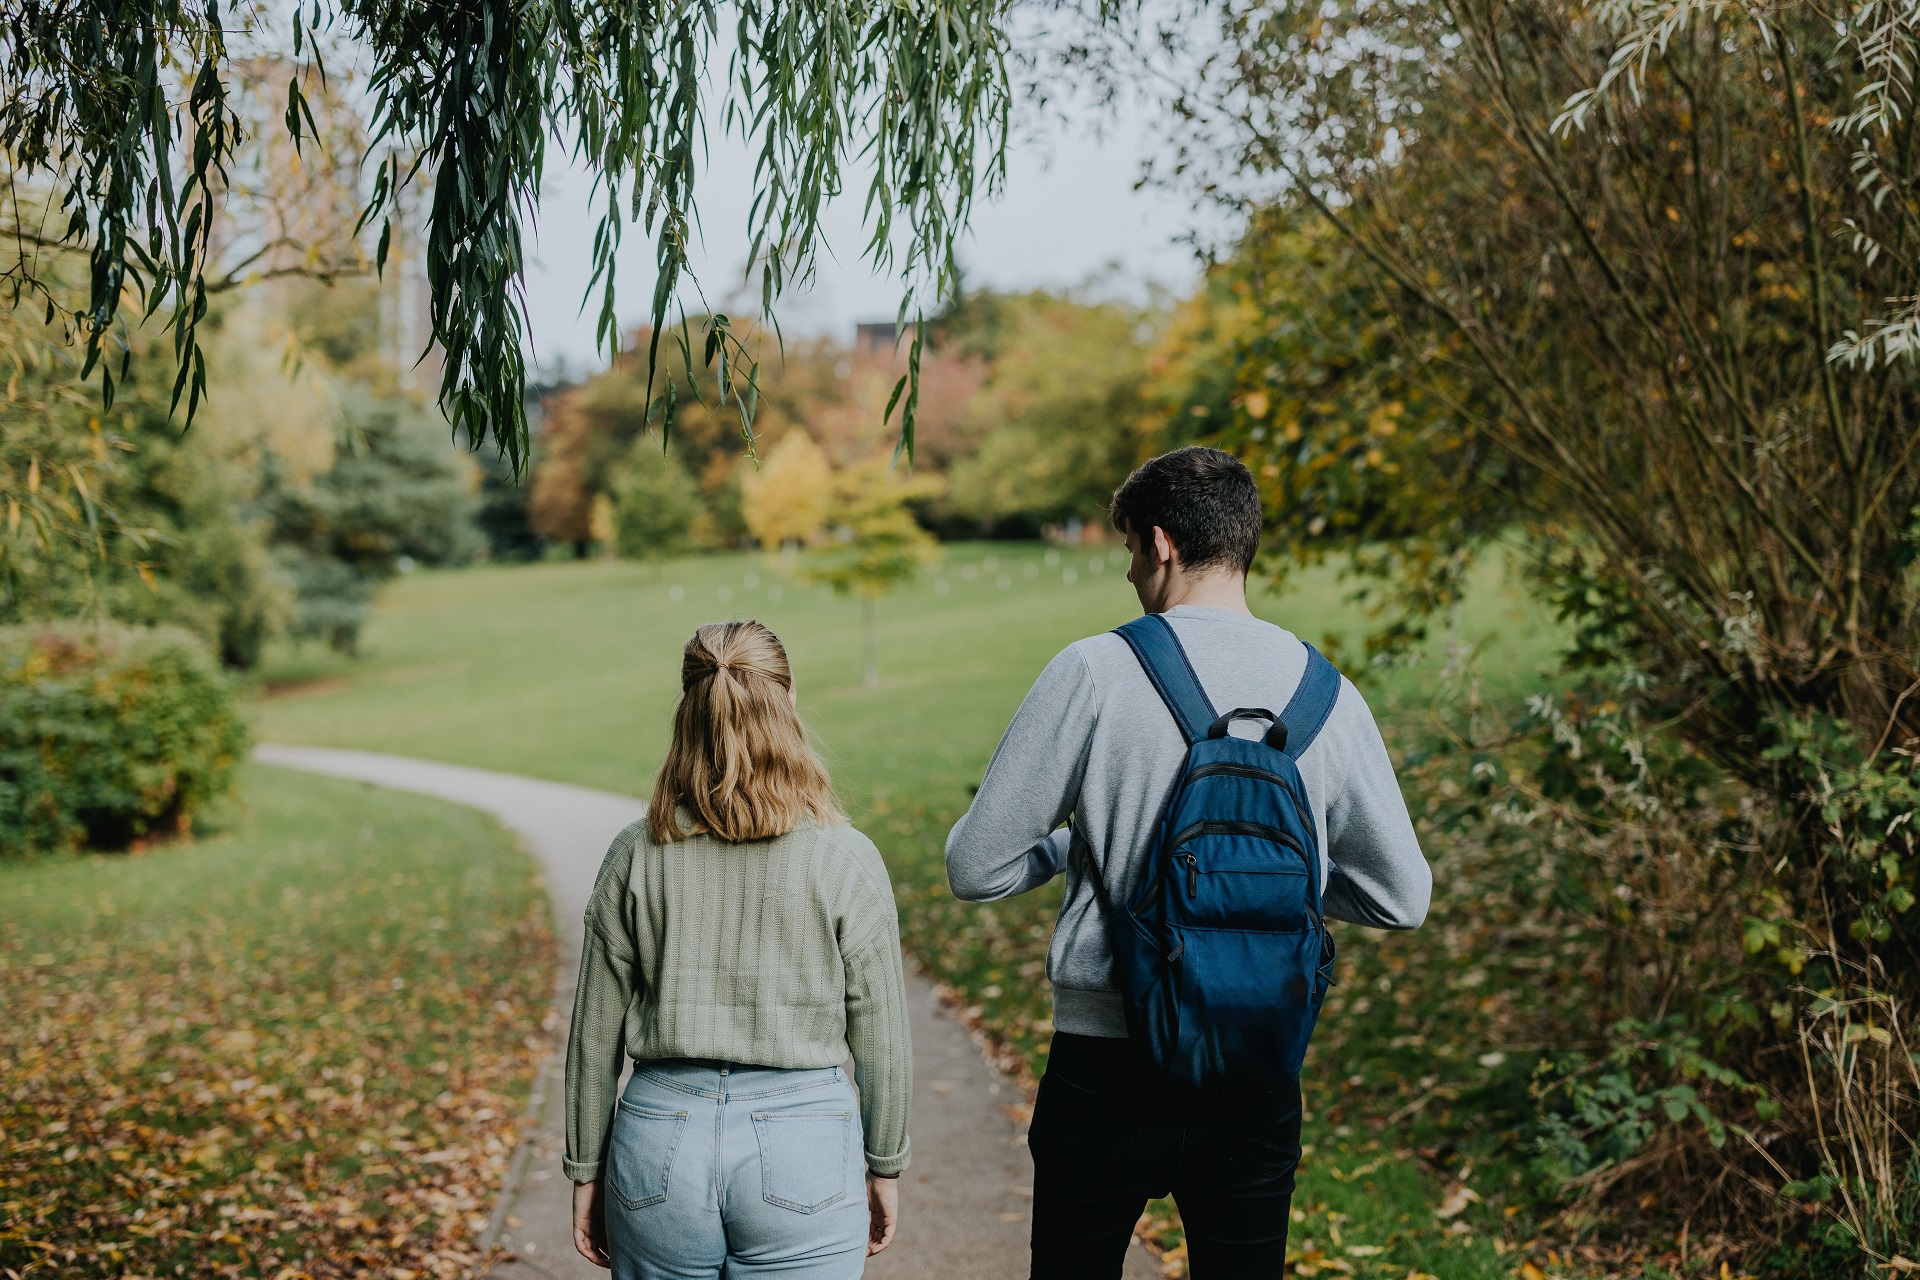 Female and male student walking down a path through a park